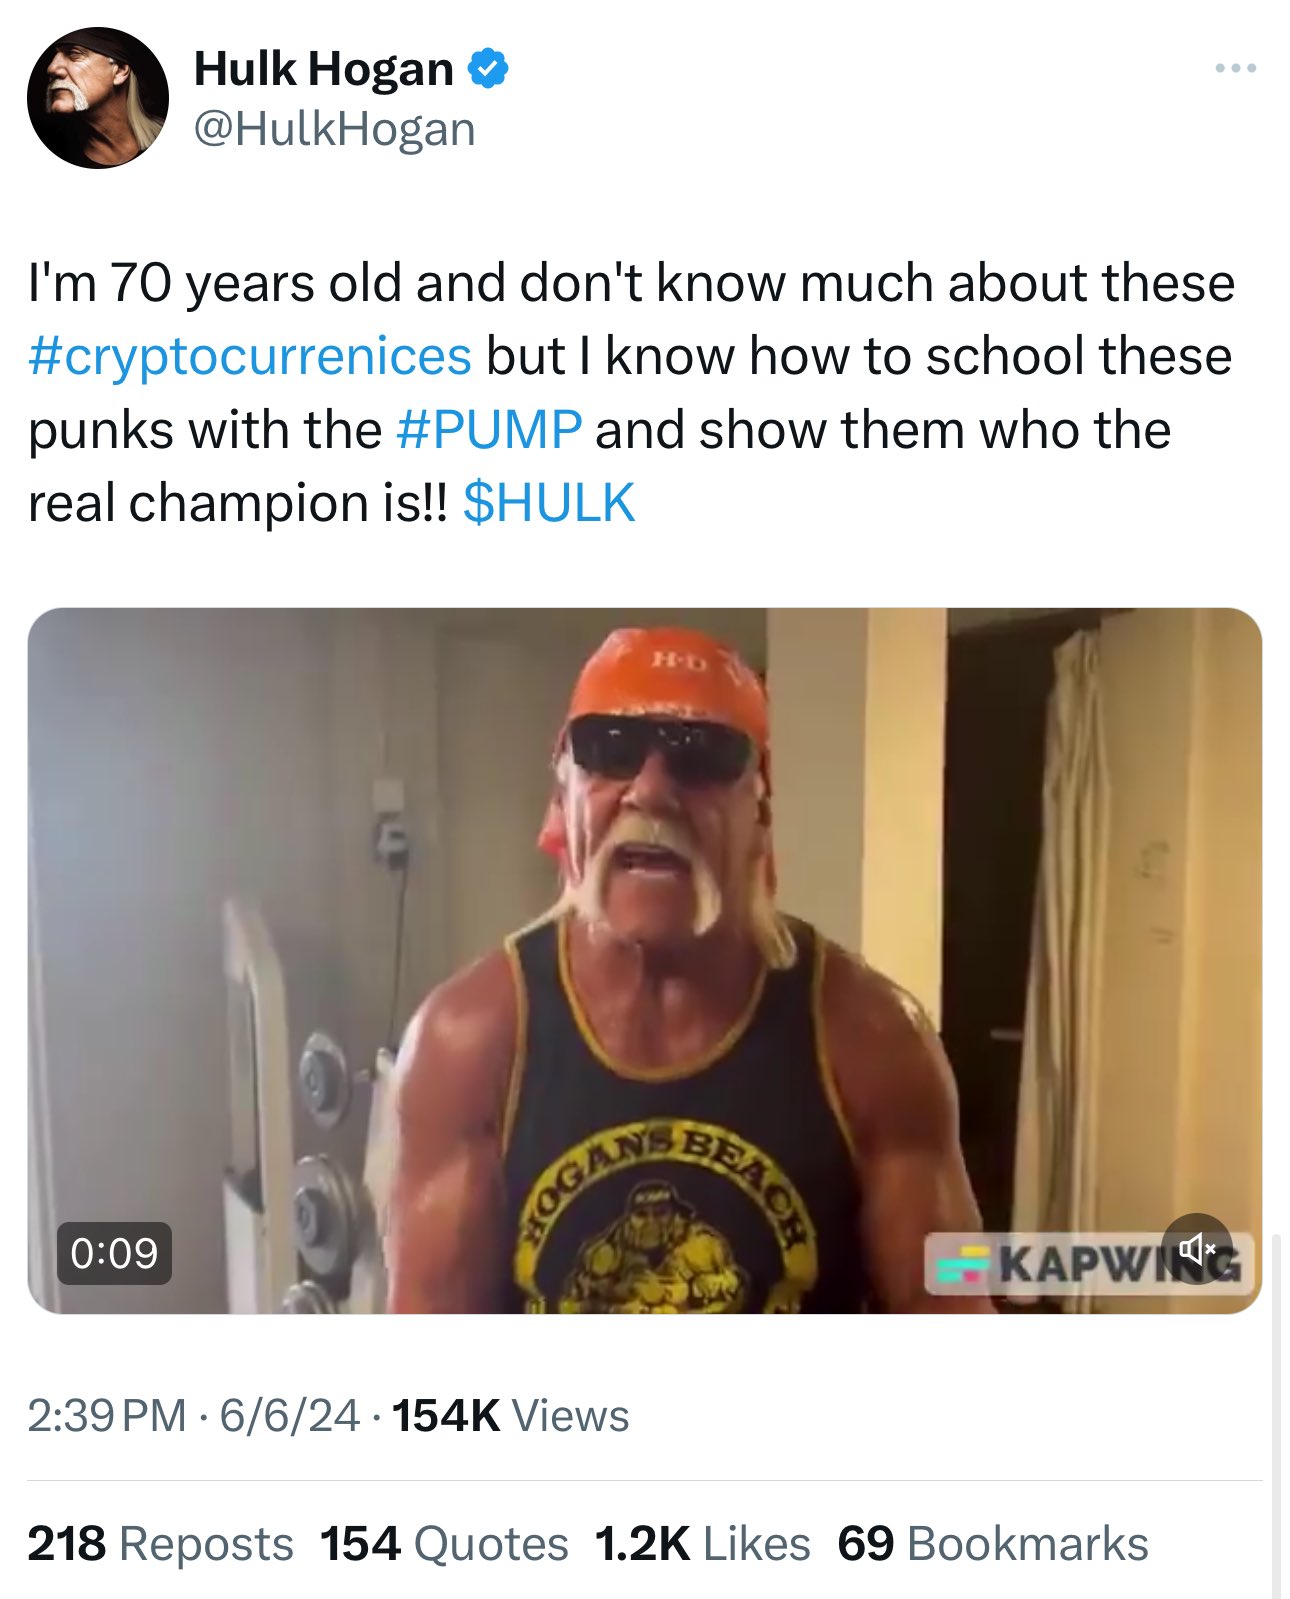 photo caption - Hulk Hogan Hogan I'm 70 years old and don't know much about these but I know how to school these punks with the and show them who the real champion is!! $Hulk HD Hogane Beach Kapwing 66 Views 218 Reposts 154 Quotes 69 Bookmarks